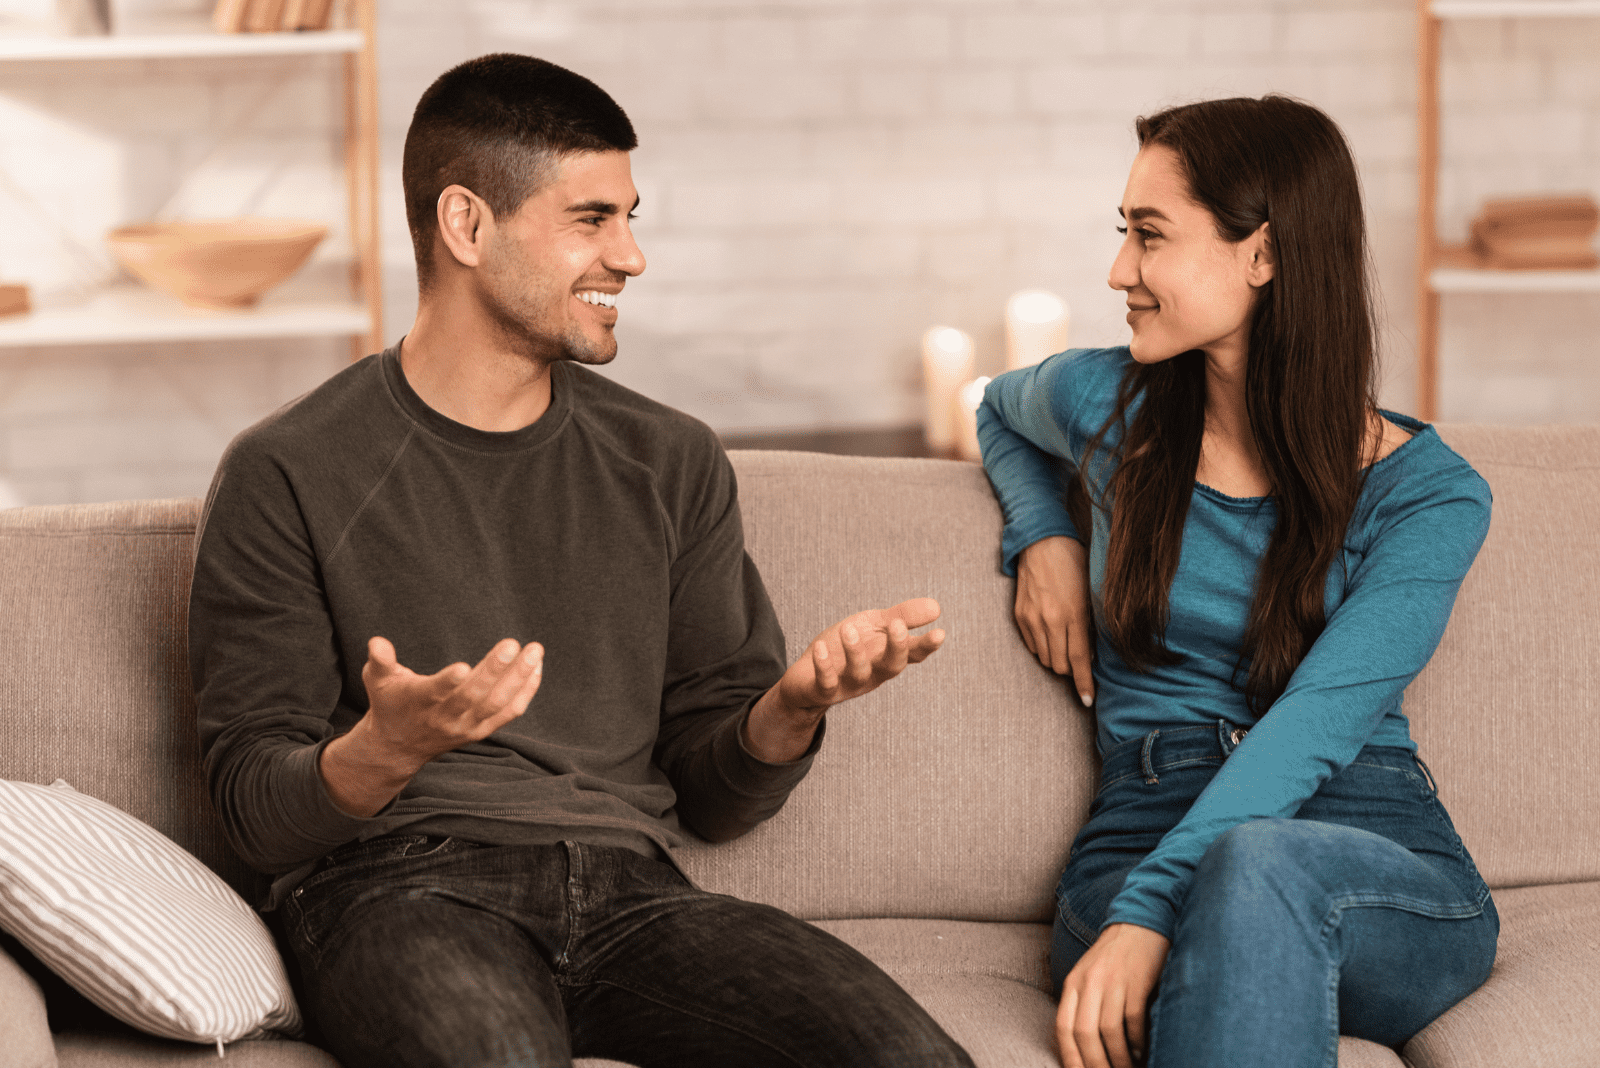 a smiling man is sitting on a couch and talking to a woman